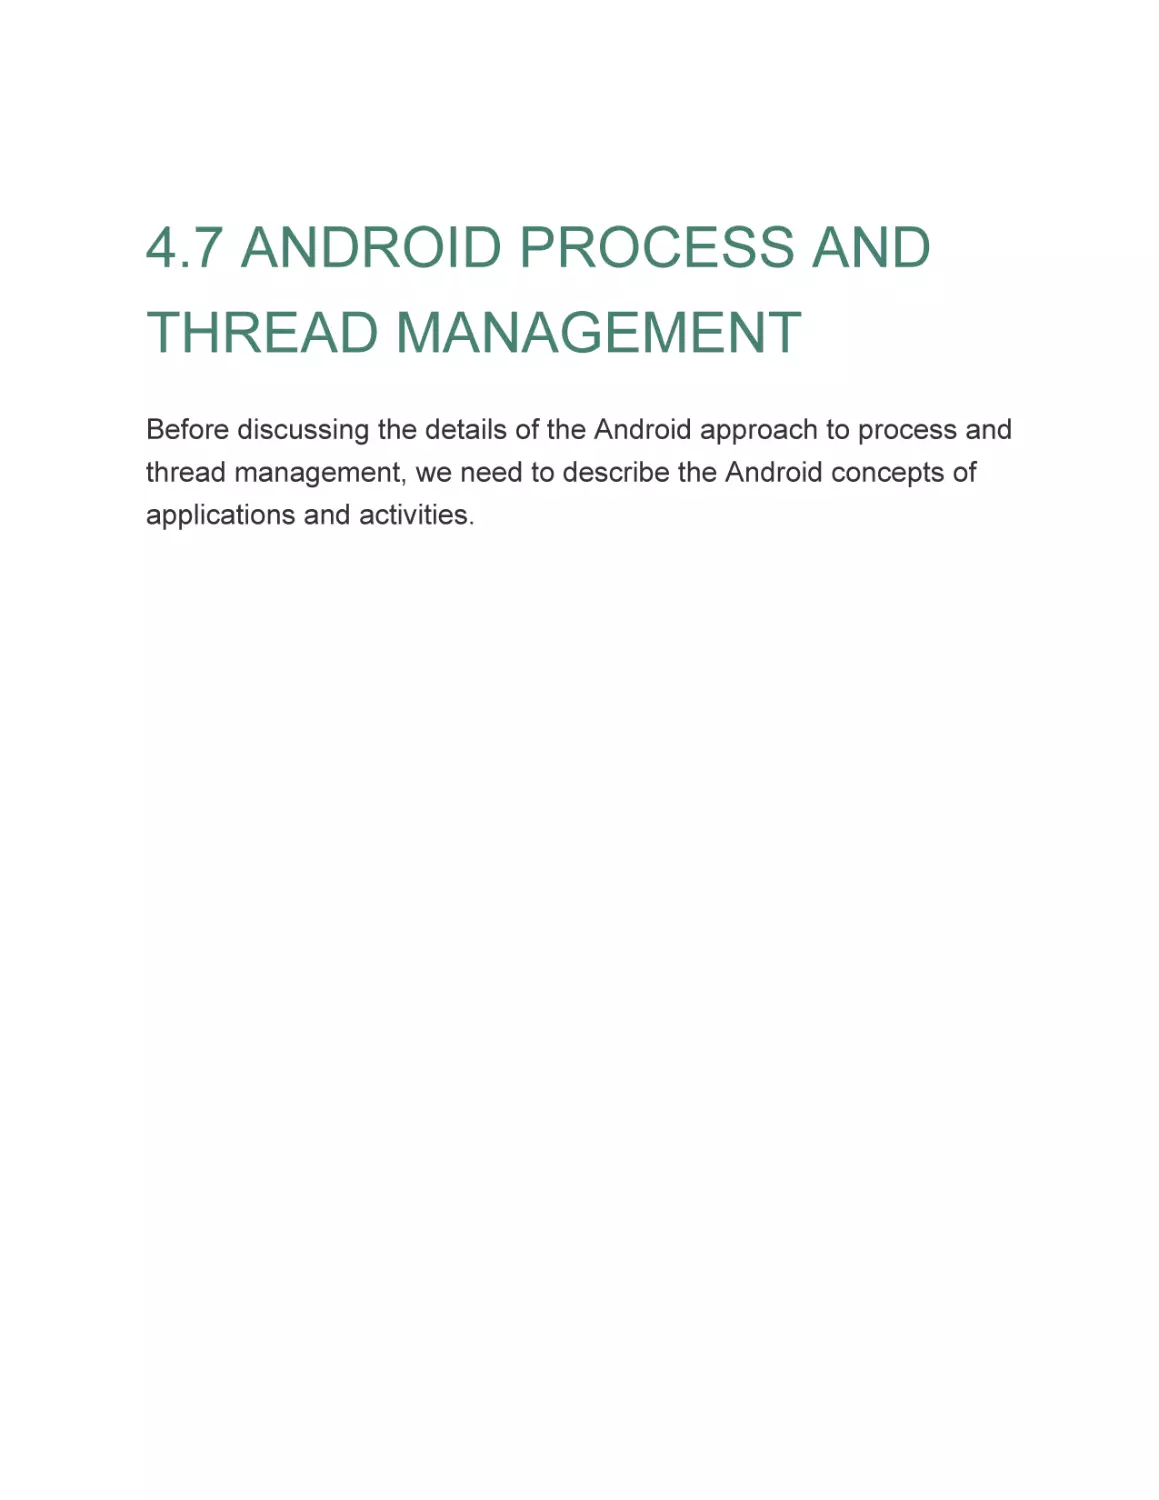 4.7 ANDROID PROCESS AND THREAD MANAGEMENT